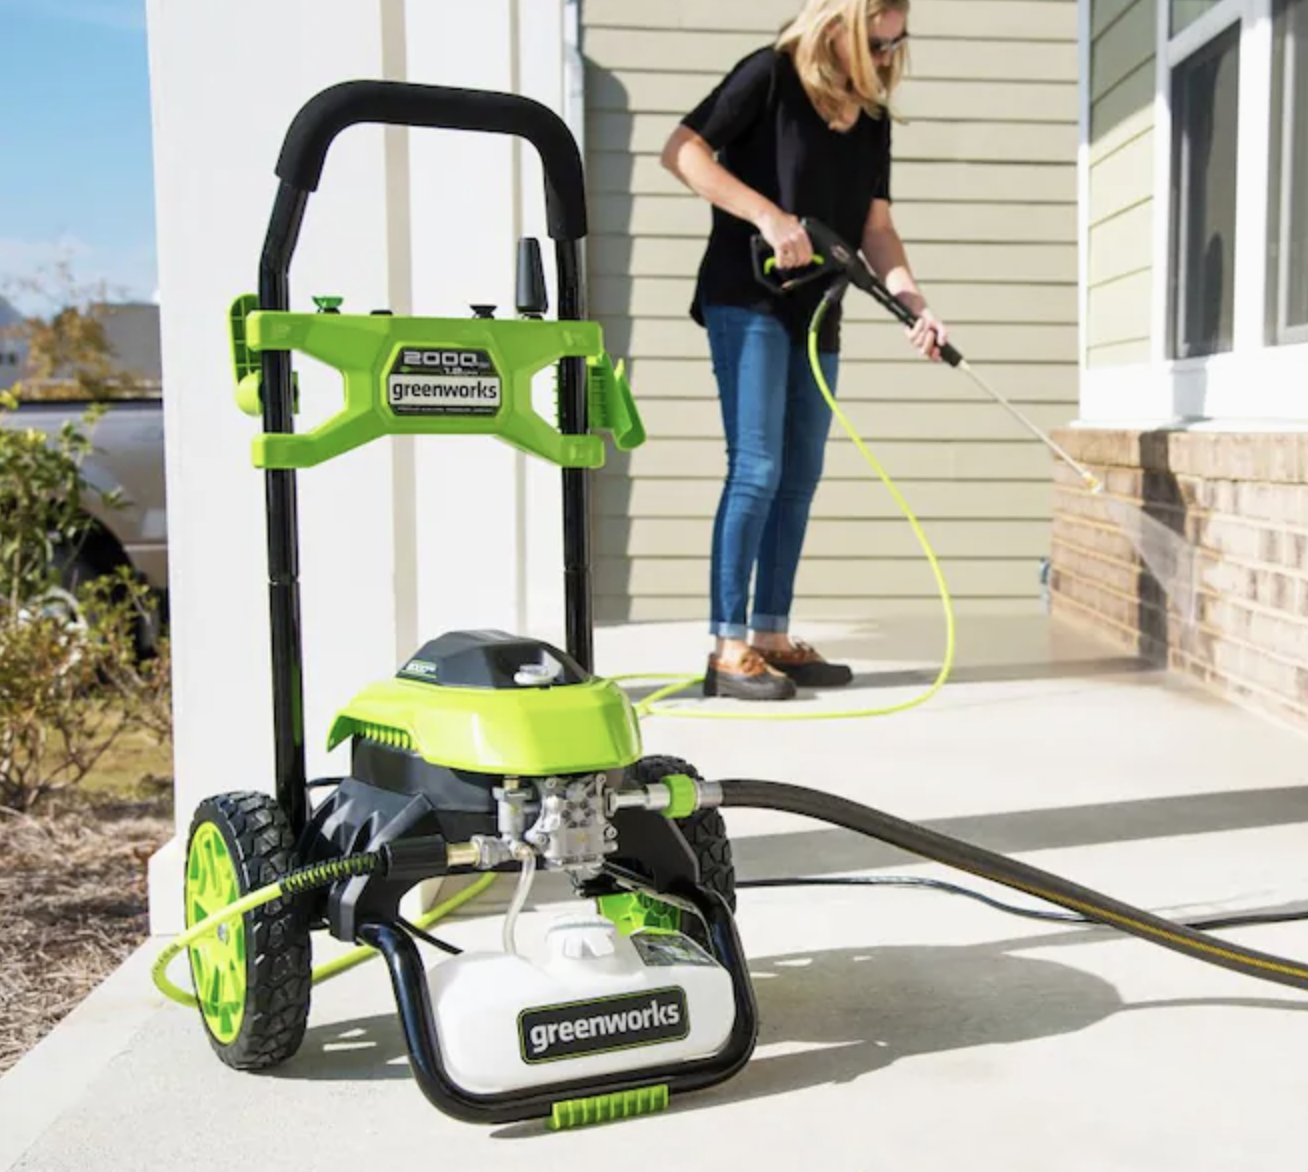 Model using the green accented vacuum-shaped pressure washer&#x27;s hose to clean the side of a home